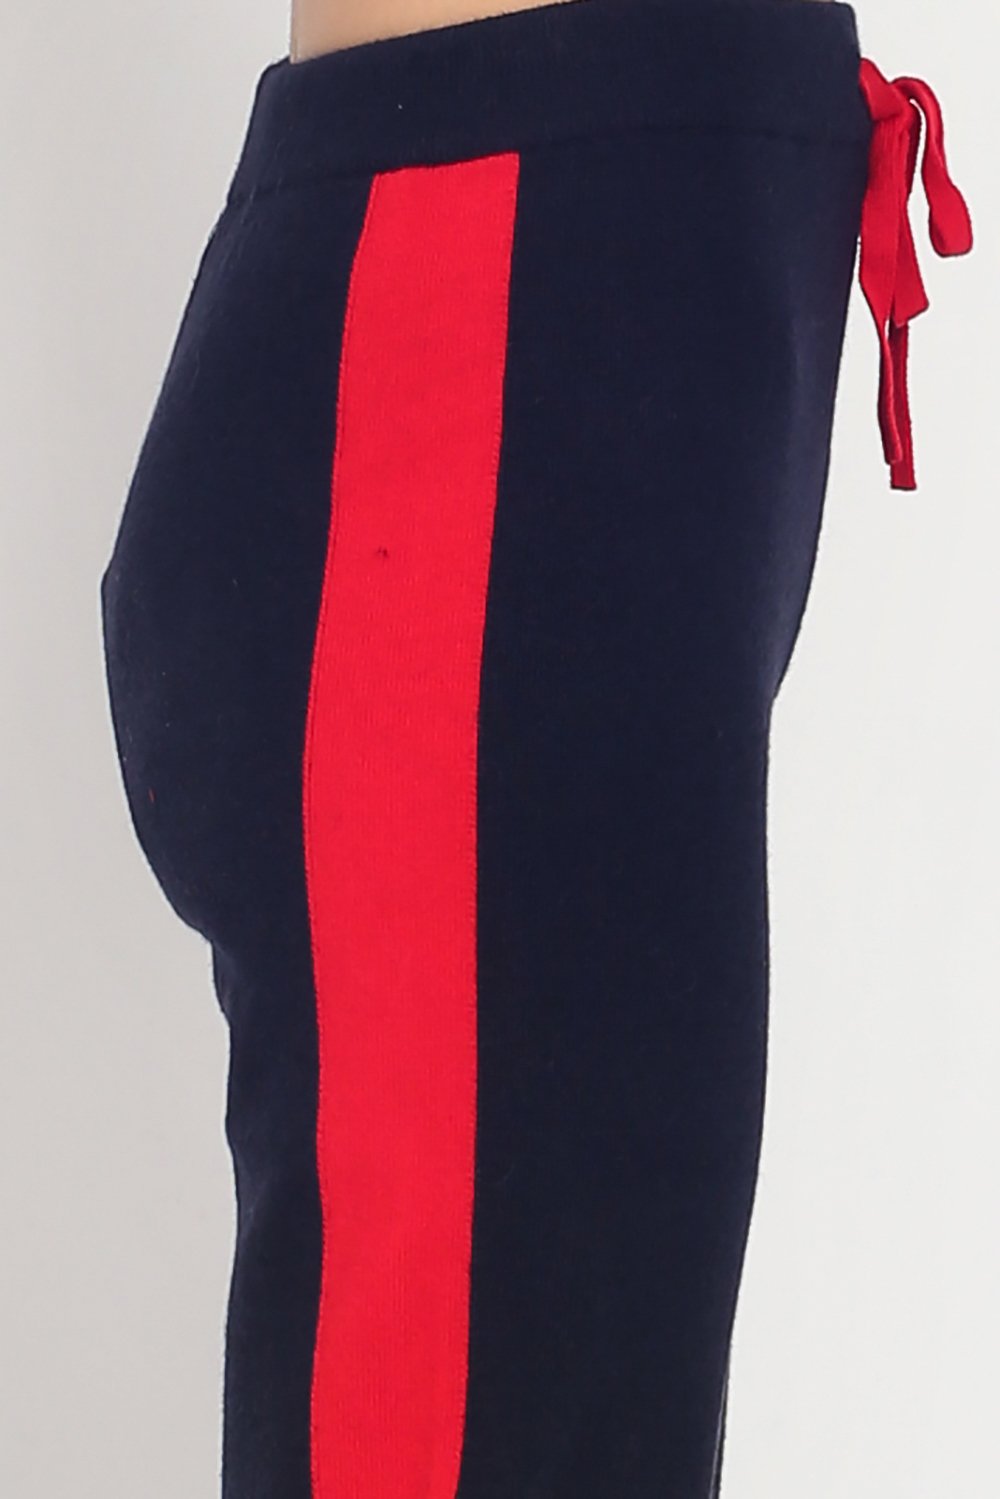 BI-COLOR SWEATPANT WITH SIDE STRIPES AND DRAWSTRING AT THE WAIST